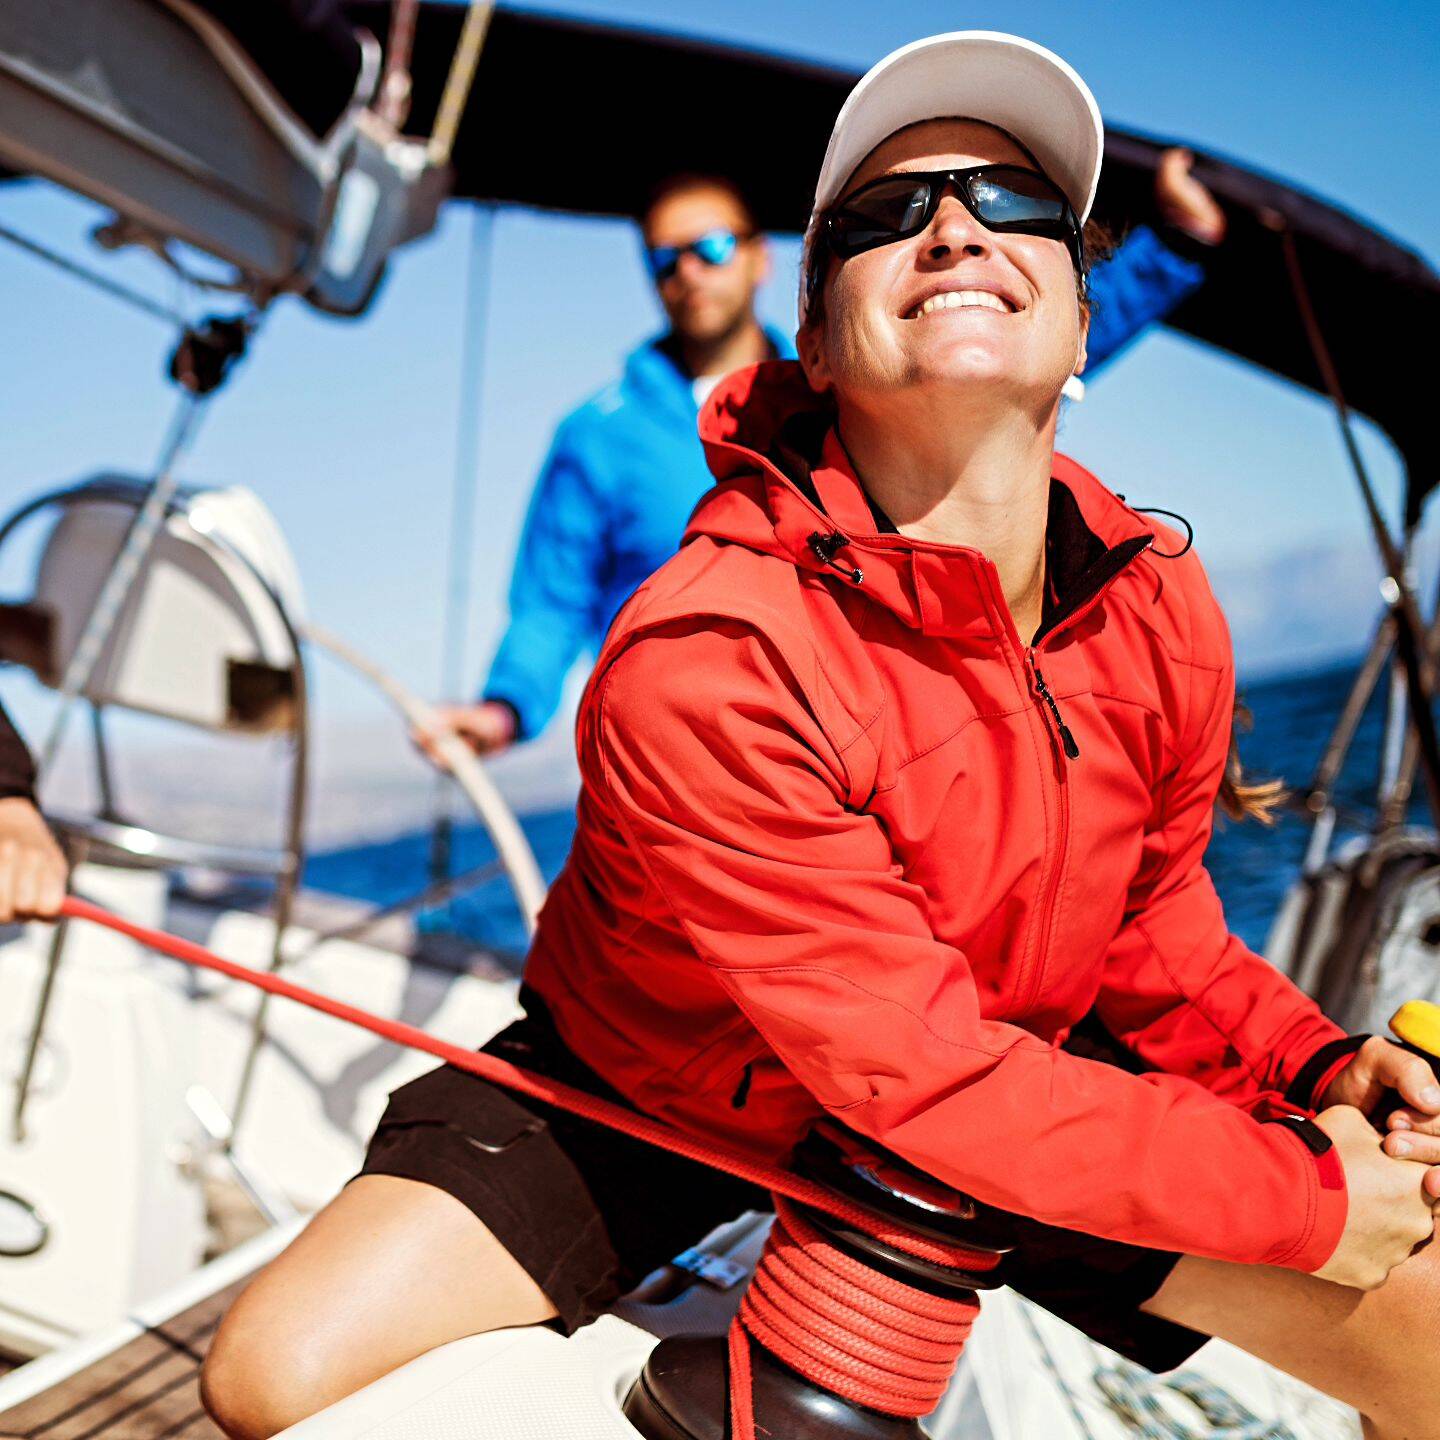 🌊⚓️ Setting Sail into the Season ⚓️🌊

The season is slowly unfurling, and what better way to kick it off than with some skipper training! 🚢⛵

There's something incredibly empowering about mastering the waves, learning to navigate the t